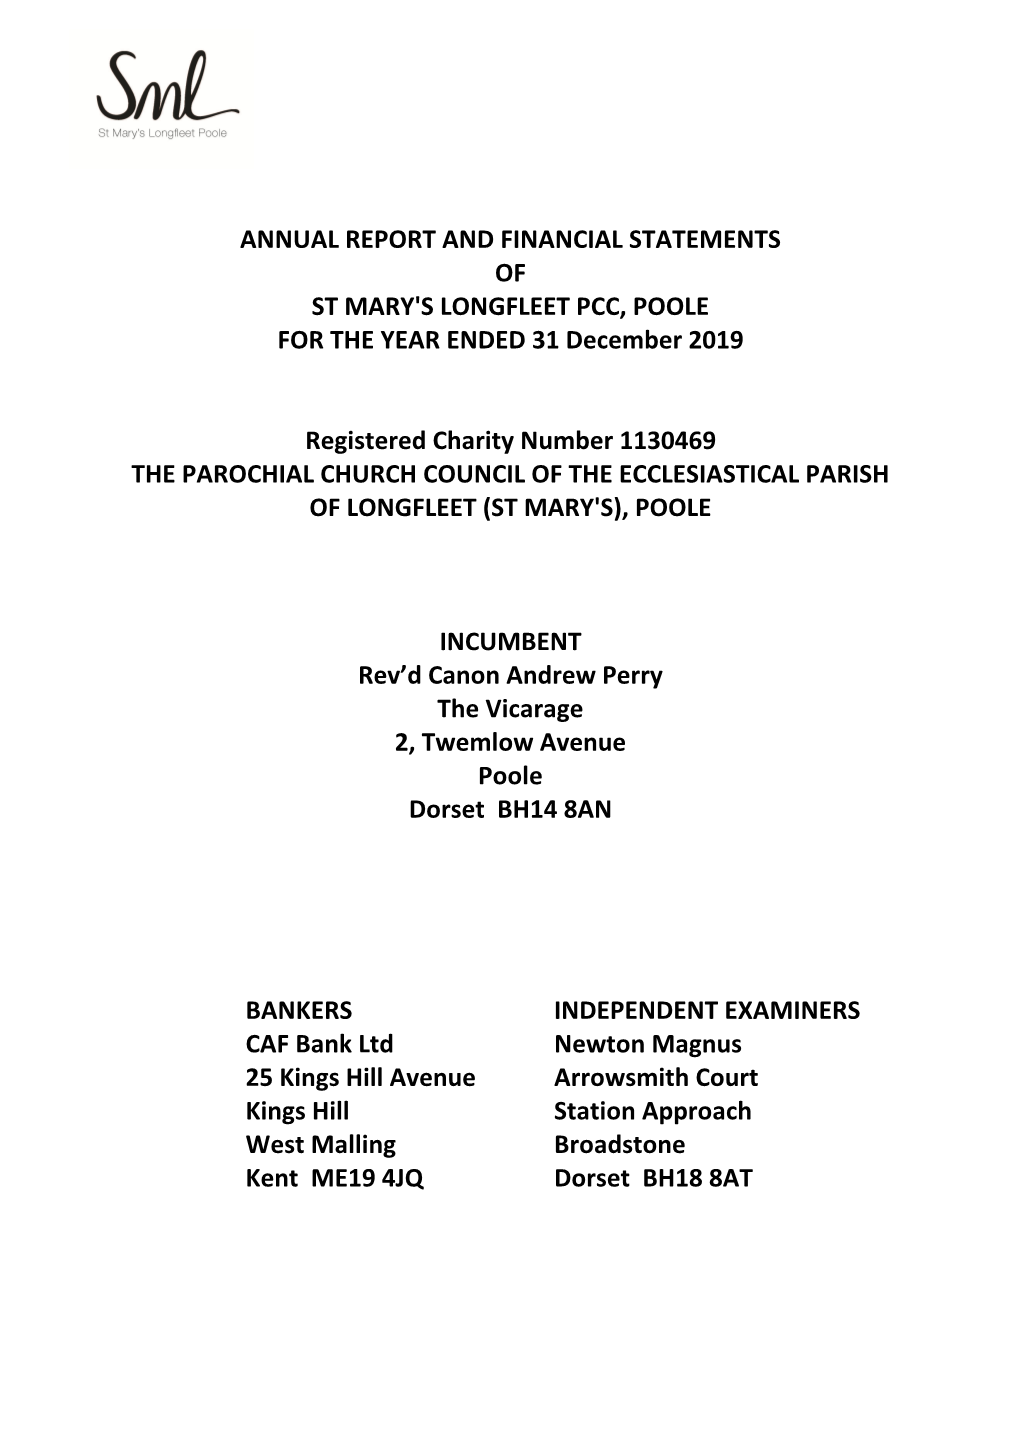 ANNUAL REPORT and FINANCIAL STATEMENTS of ST MARY's LONGFLEET PCC, POOLE for the YEAR ENDED 31 December 2019